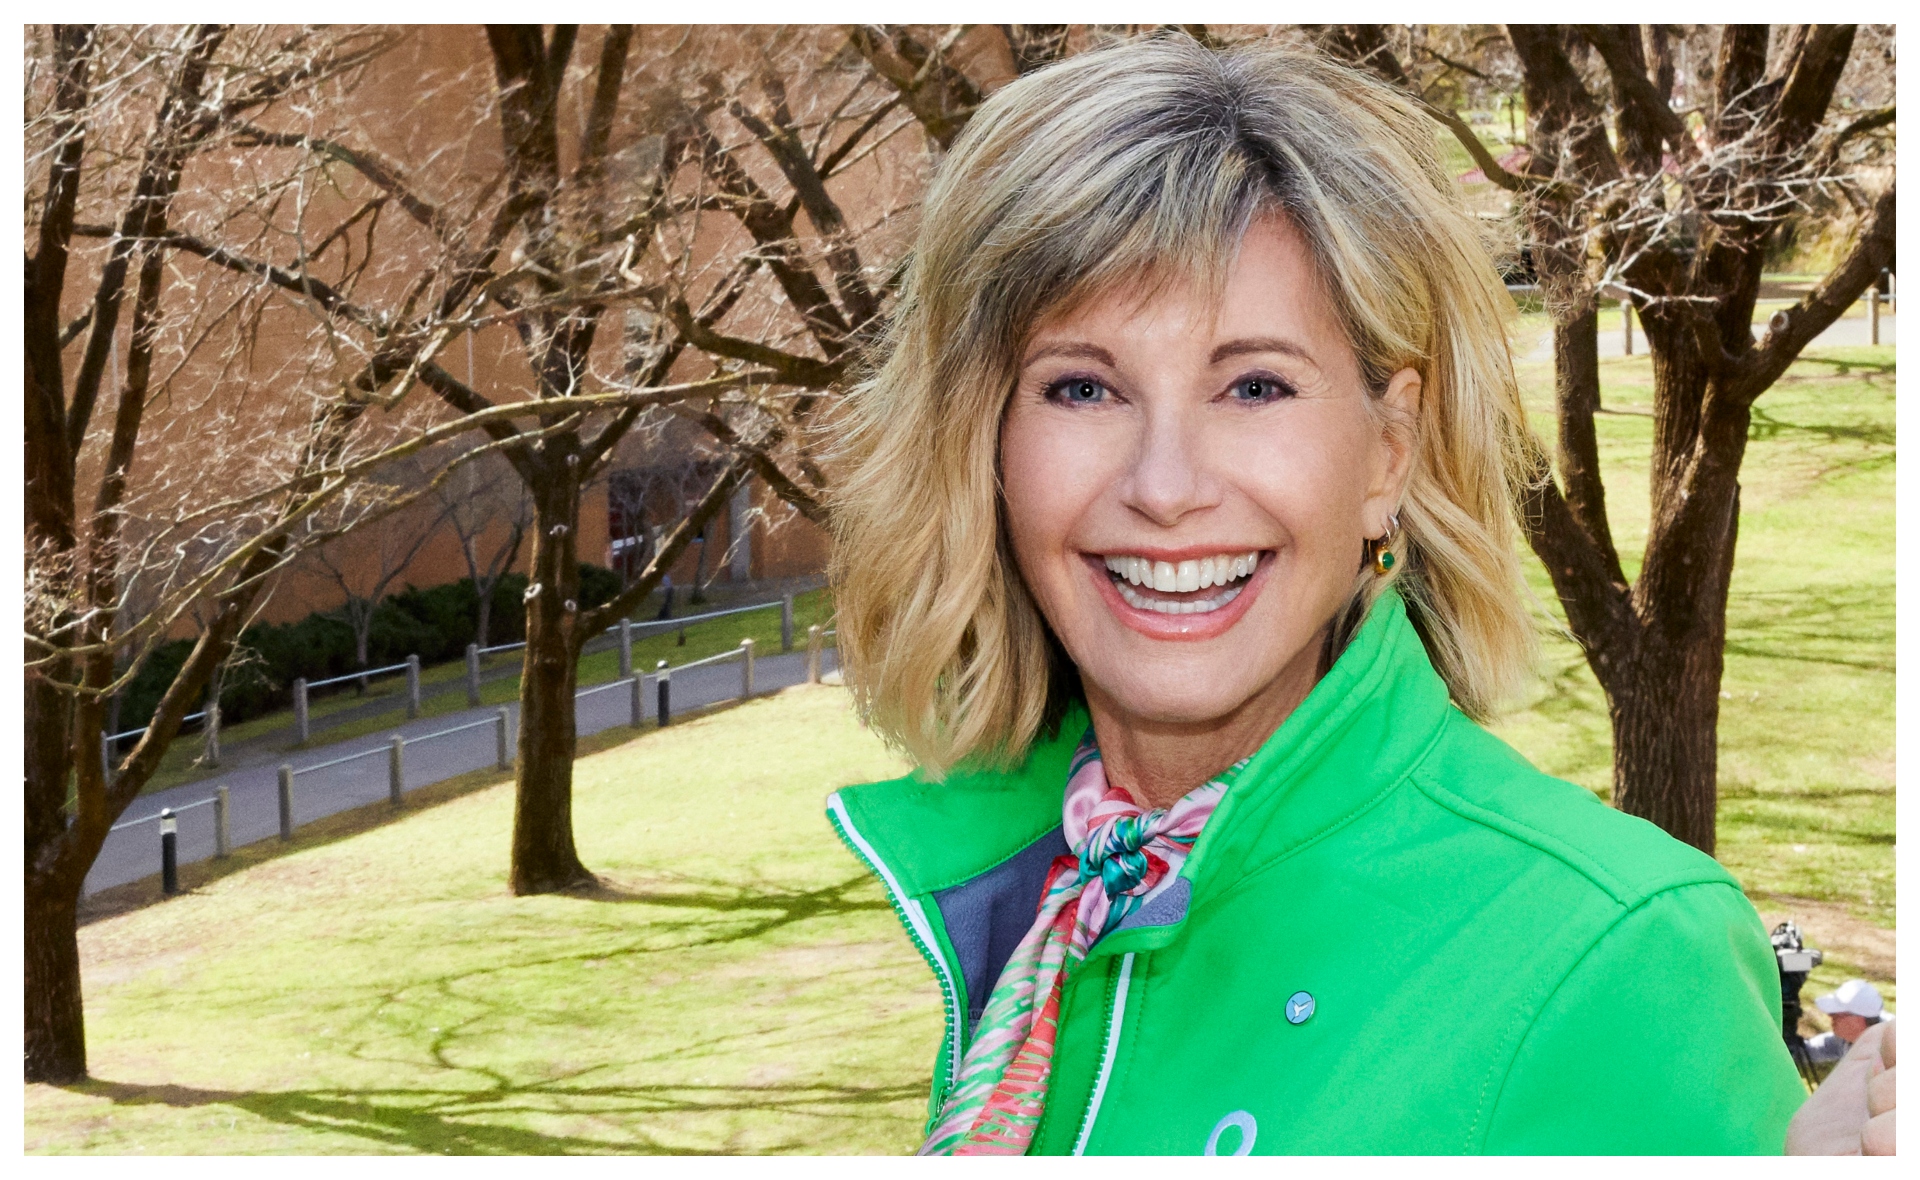 Olivia Newton-John’s urgent call to Australians: “I want to pass on something good, something that’s going to help people”